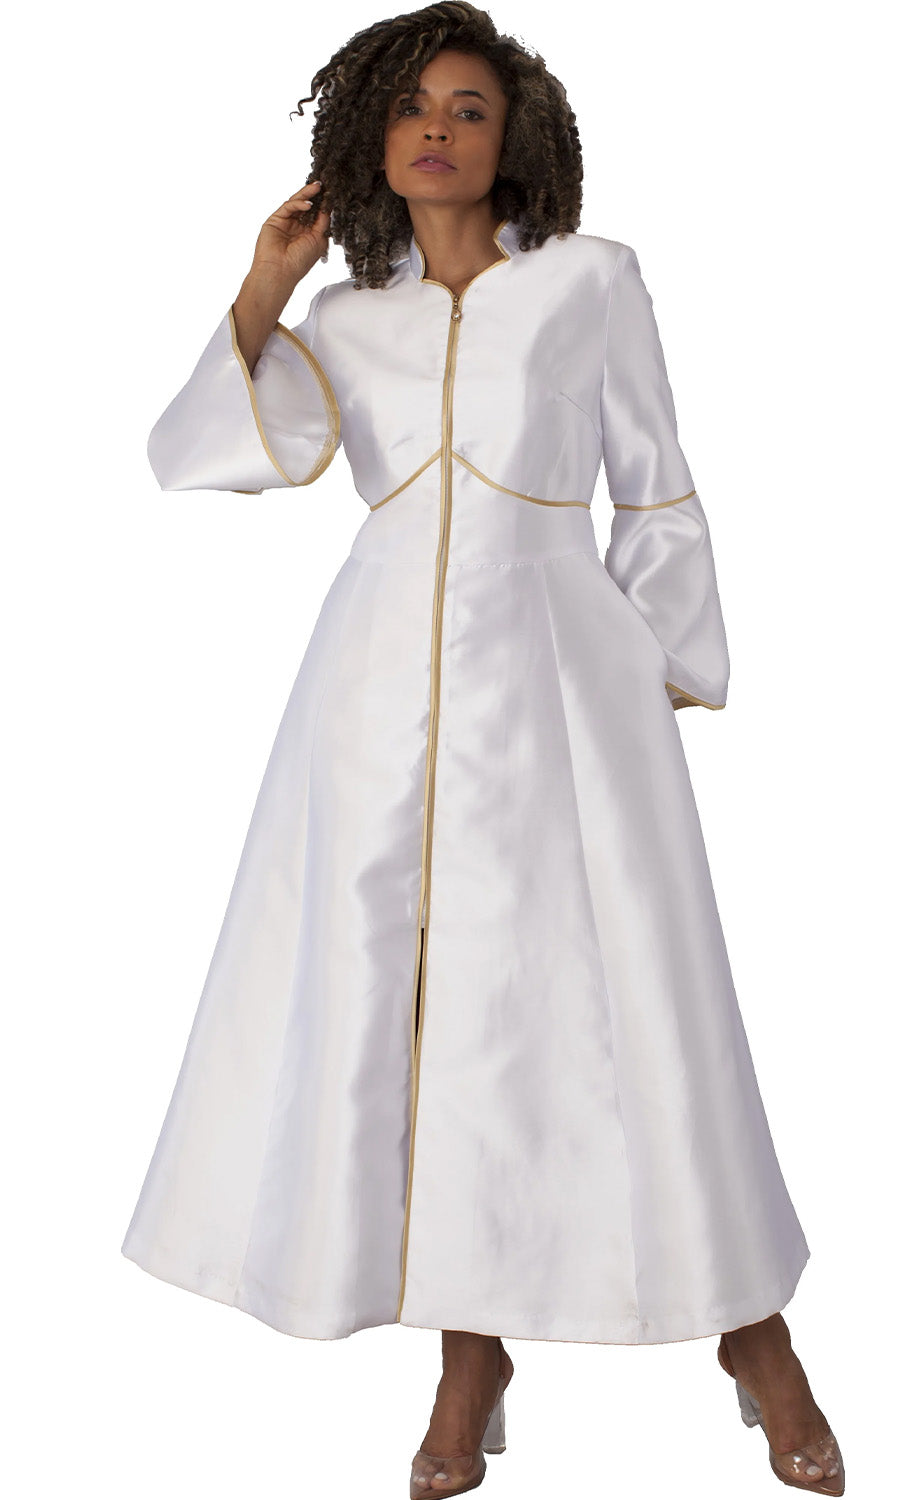 Tally Taylor Church Robe 4731C-White/Gold - Church Suits For Less